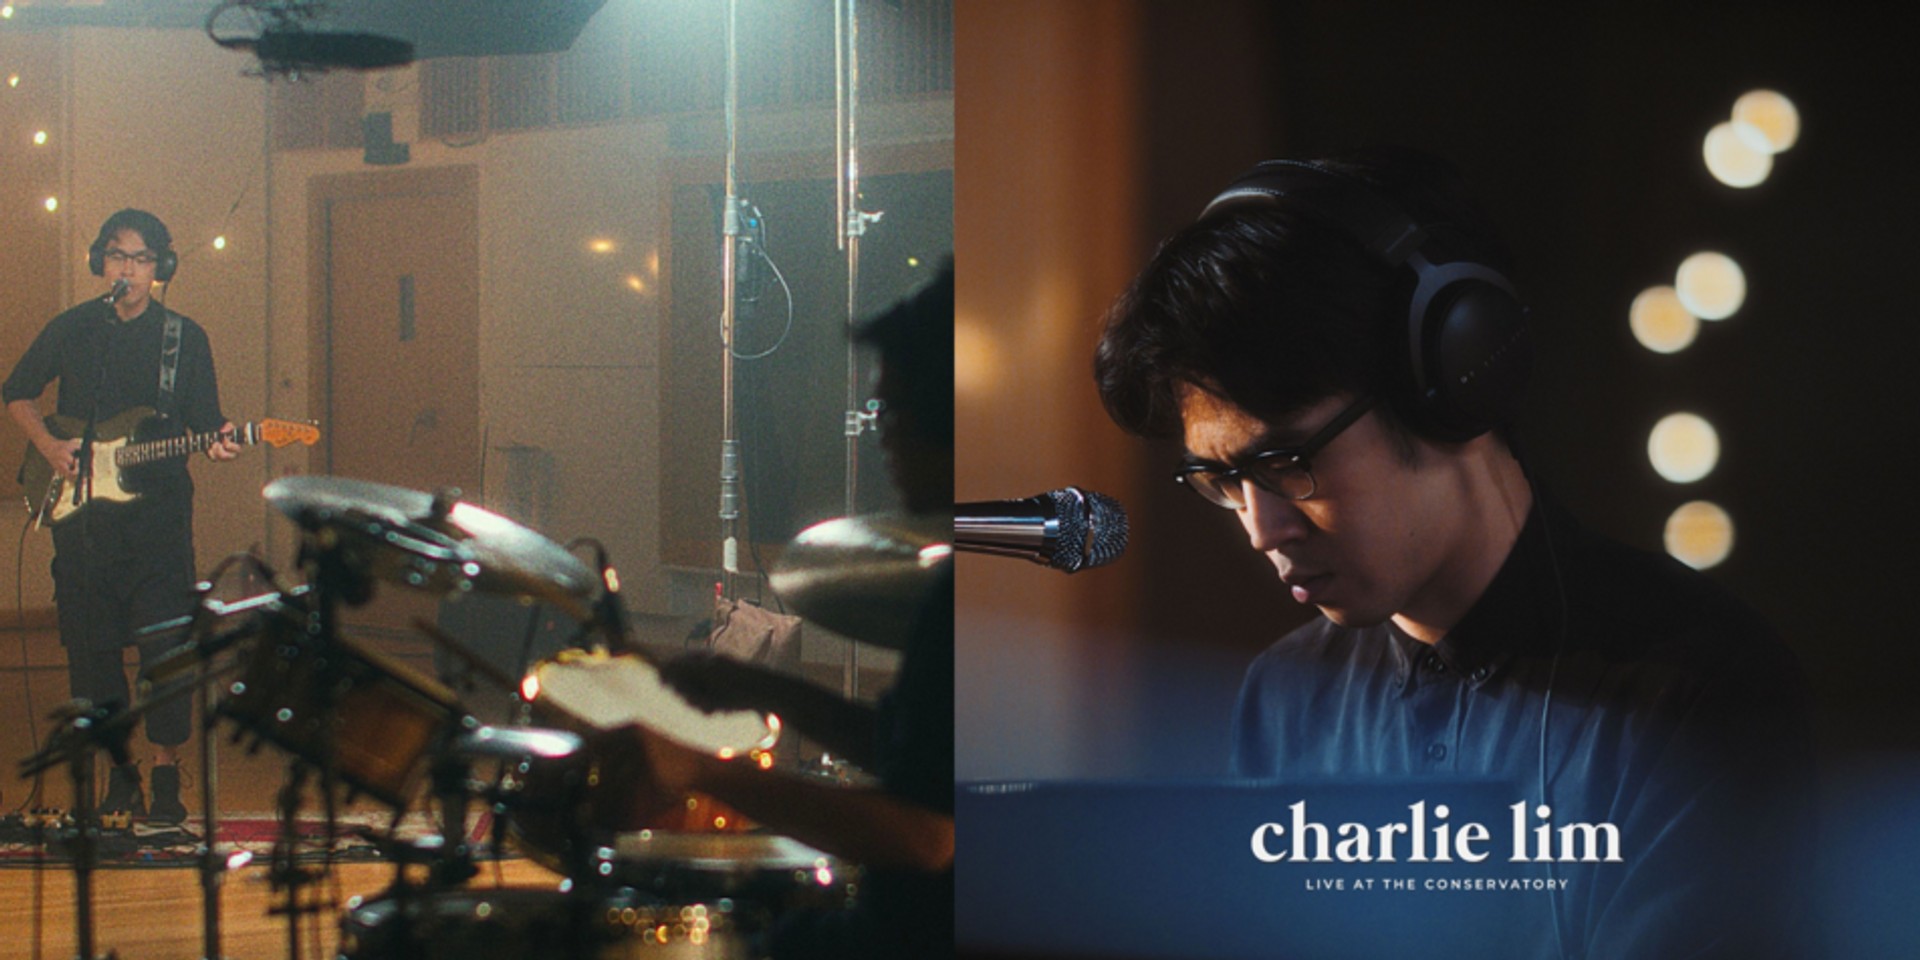 Charlie Lim unveils live performance and EP 'Live at The Conservatory'